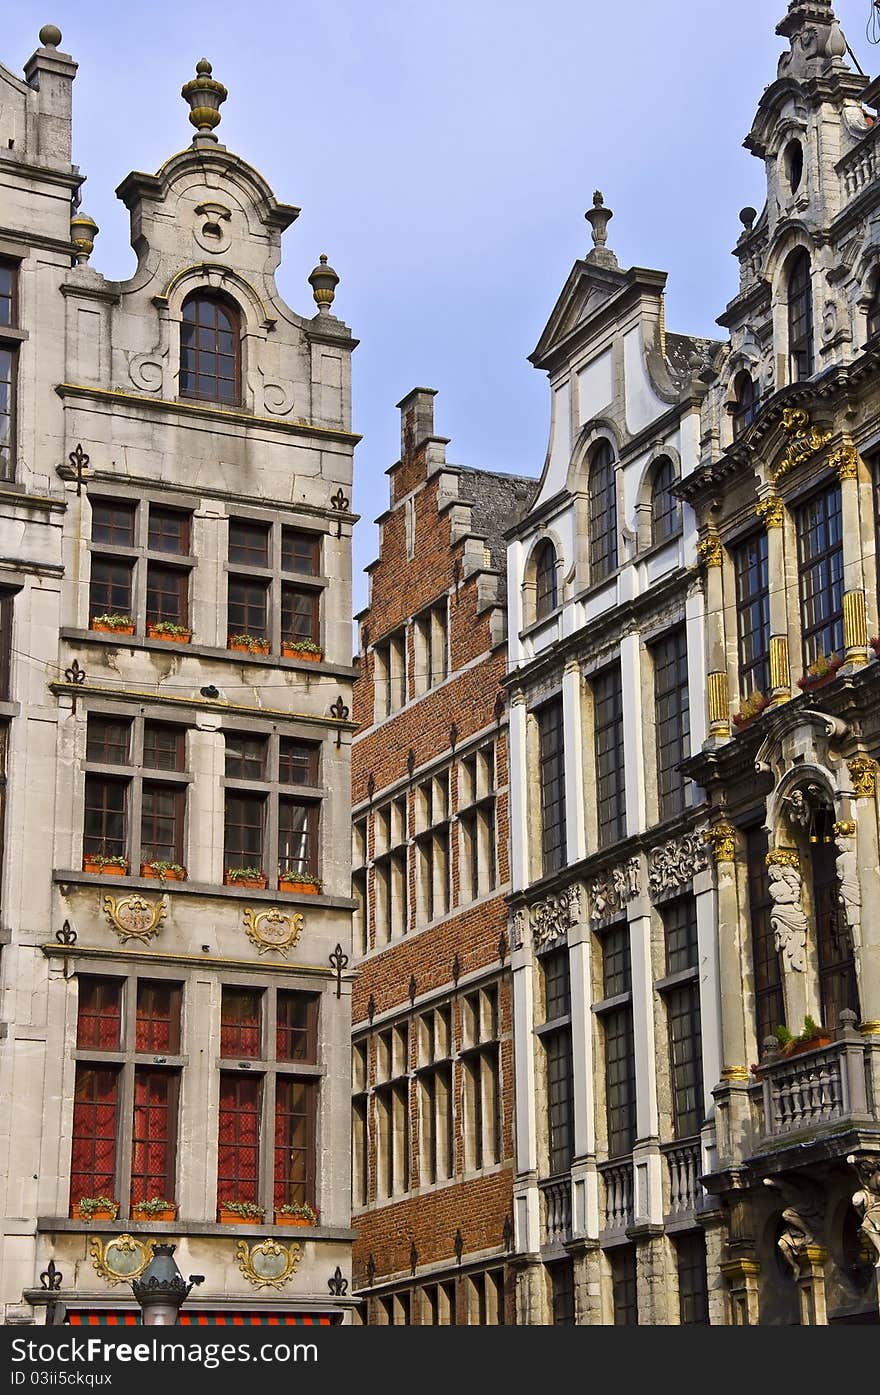 Architecture of Brussels. Ancient houses in the town square. Fragment. Spring, daylight.